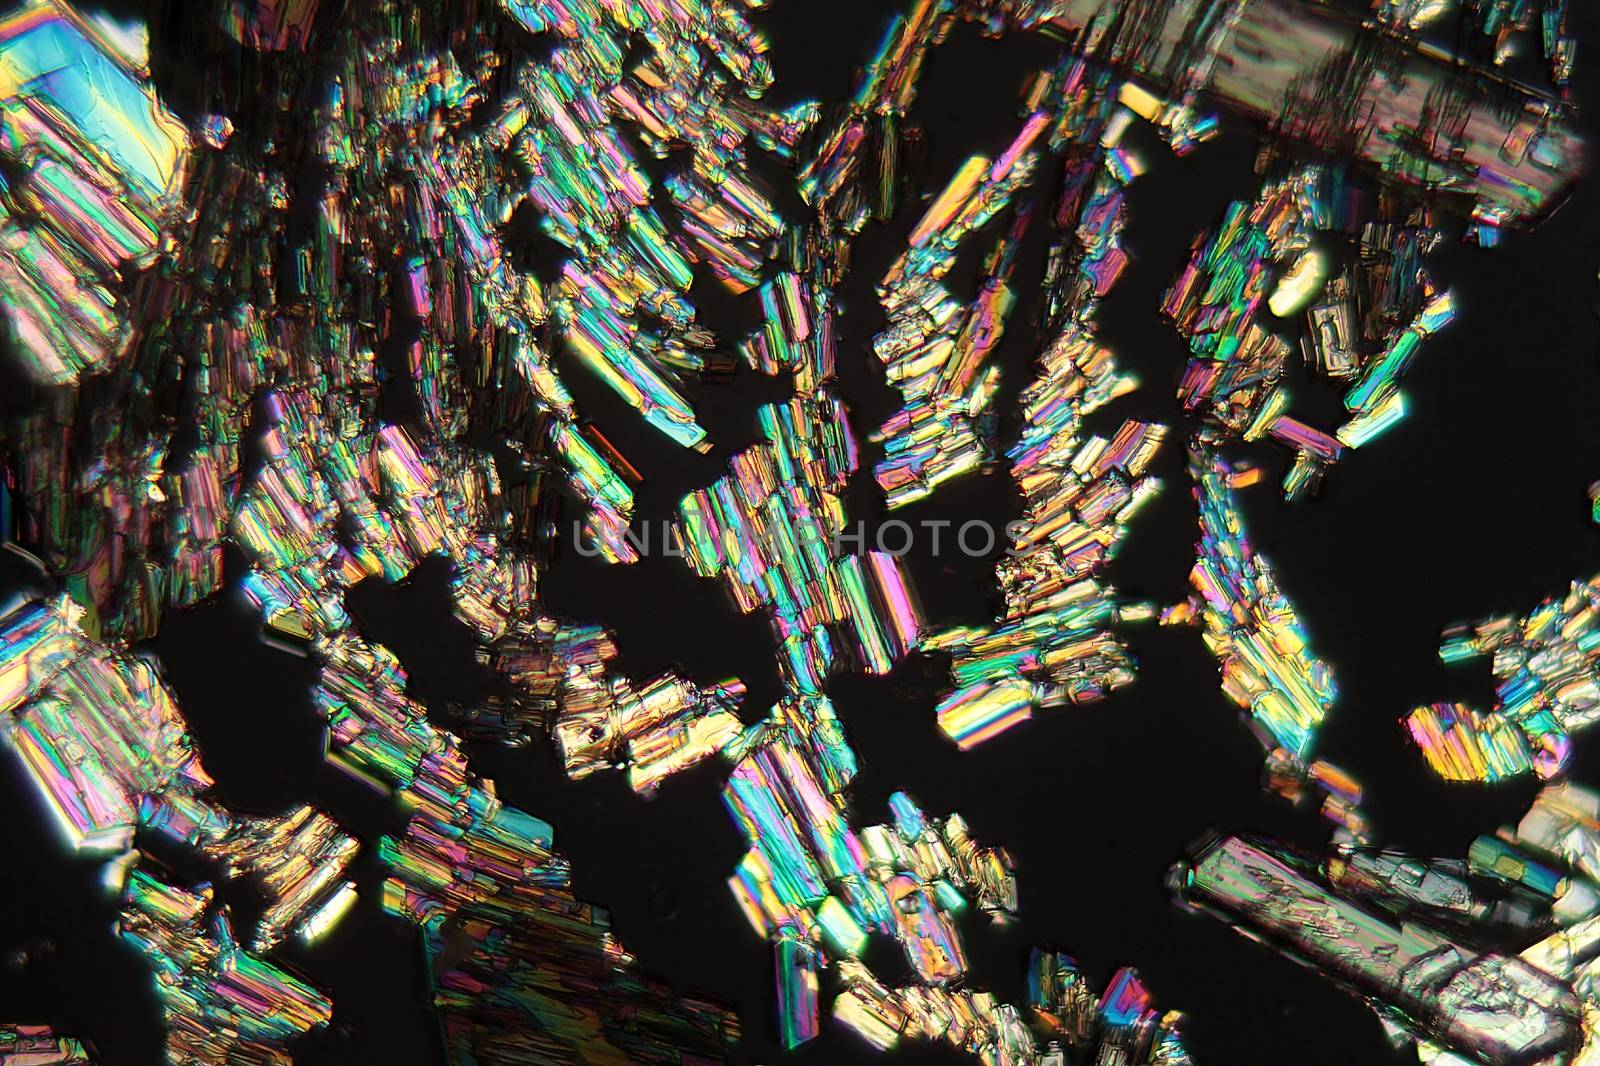 Alanine is a amino acid which occurs in the human body. The photo is made with a magnification of 100x and in polarized light. The sample is pure Alanine precipitated from a solution on a microscope slide.